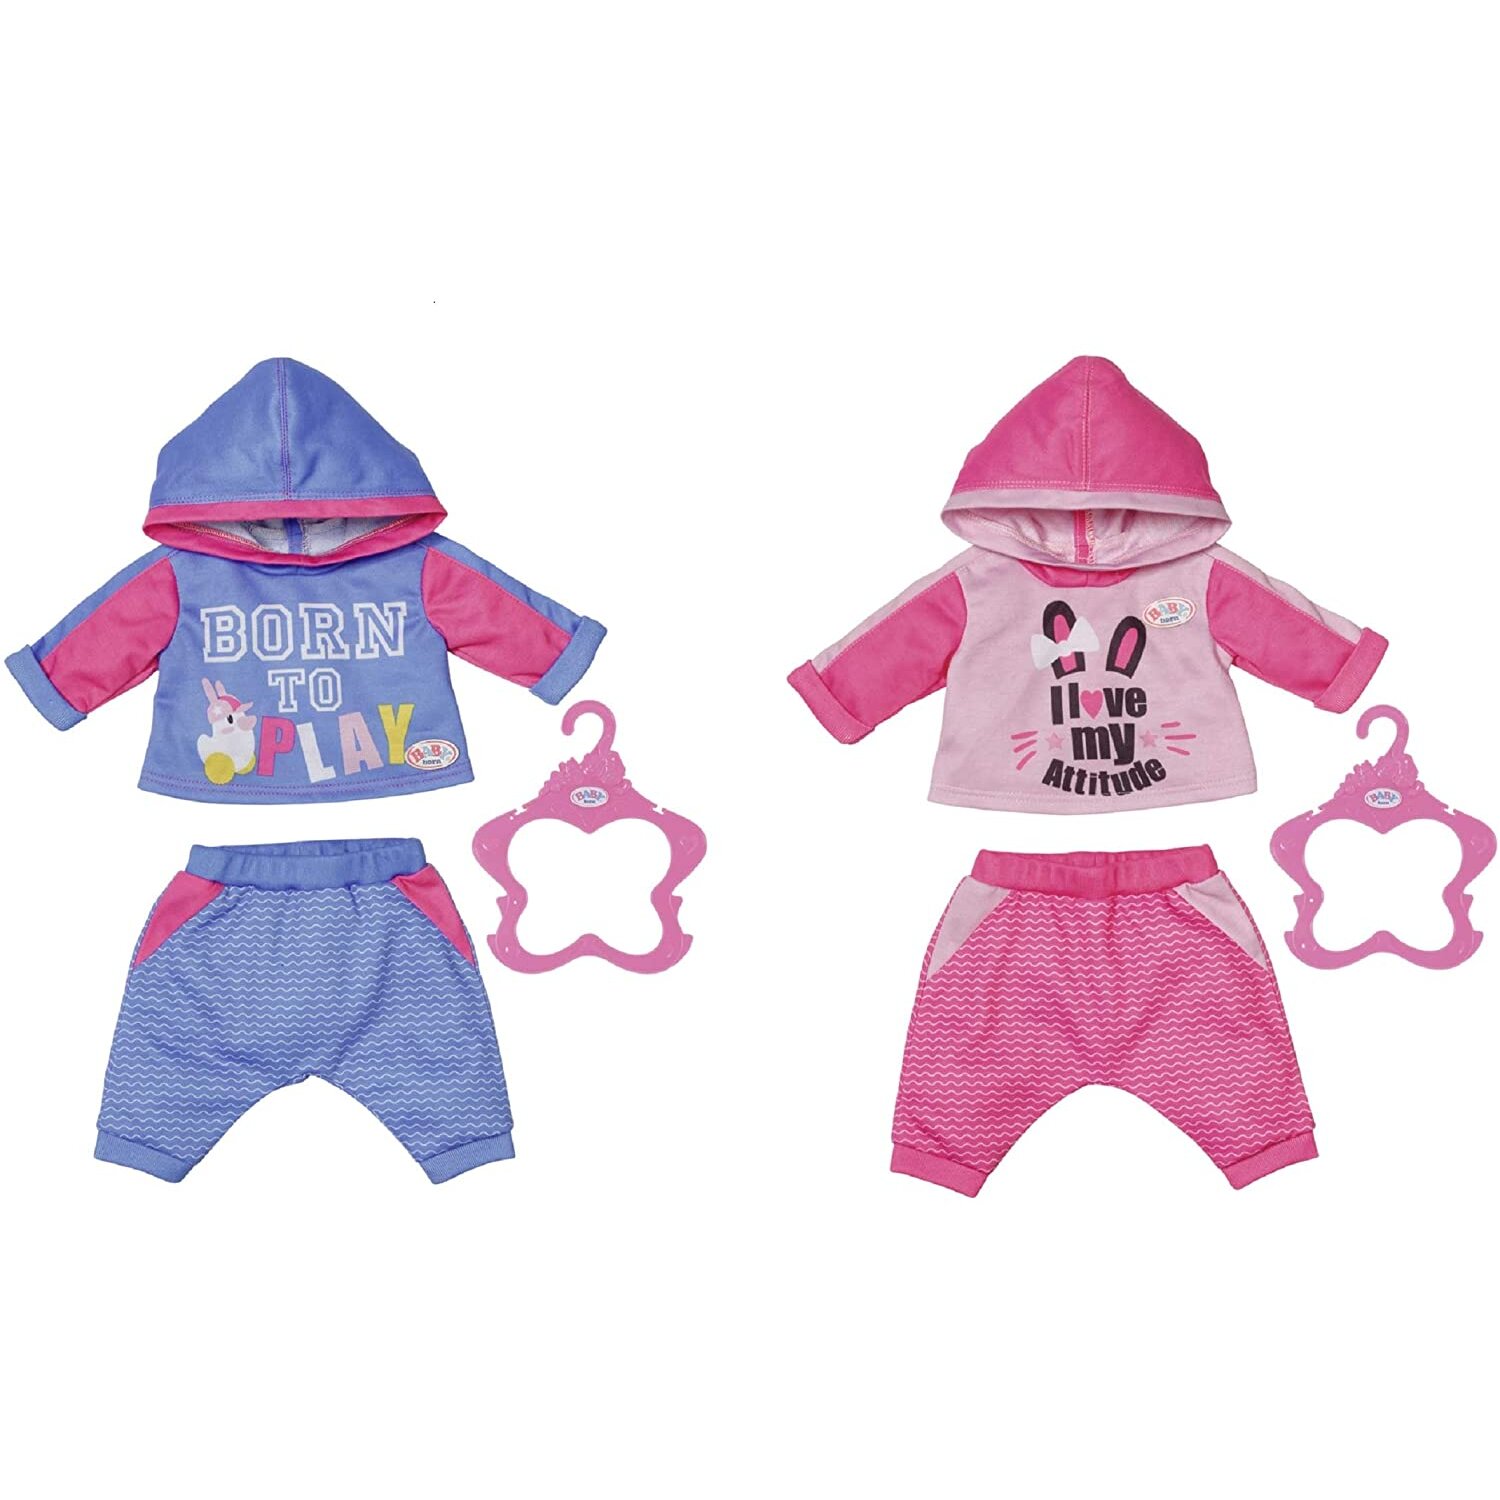 BABY born Jogging Suits Set of 2, 43 cm - For Toddlers 3 Years and Up - Easy for Small Hands - Includes Jogging Suits in Two Designs and Hanger,